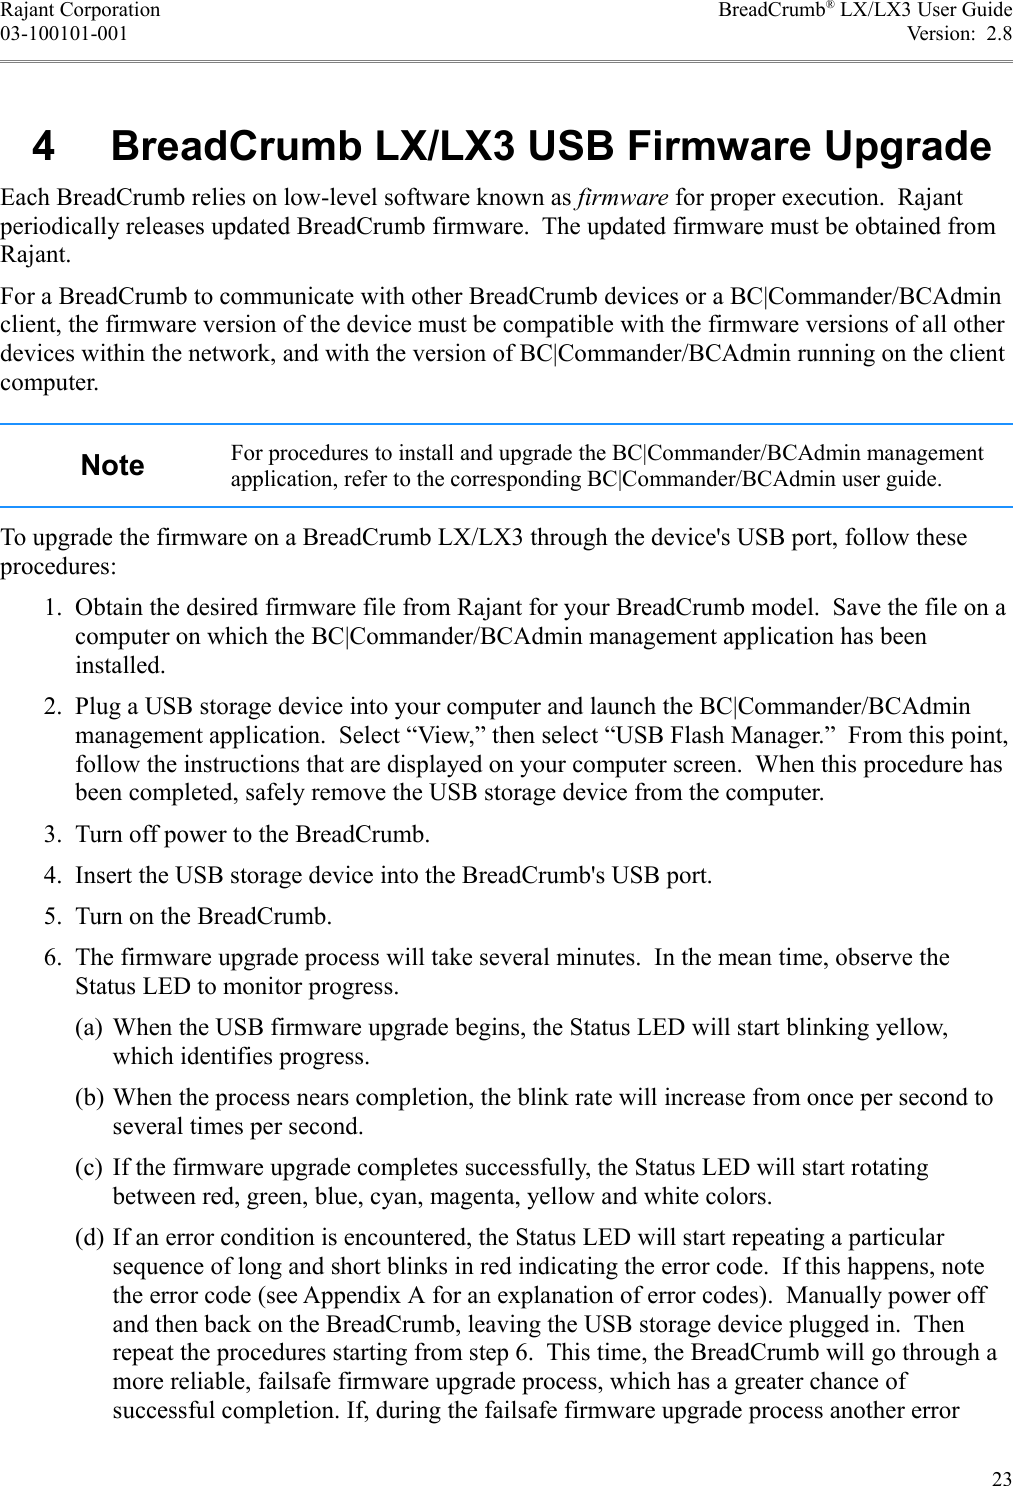 Rajant Corporation BreadCrumb® LX/LX3 User Guide03-100101-001 Version:  2.8 4  BreadCrumb LX/LX3 USB Firmware UpgradeEach BreadCrumb relies on low-level software known as firmware for proper execution.  Rajant periodically releases updated BreadCrumb firmware.  The updated firmware must be obtained from Rajant.For a BreadCrumb to communicate with other BreadCrumb devices or a BC|Commander/BCAdmin client, the firmware version of the device must be compatible with the firmware versions of all other devices within the network, and with the version of BC|Commander/BCAdmin running on the client computer.Note For procedures to install and upgrade the BC|Commander/BCAdmin management application, refer to the corresponding BC|Commander/BCAdmin user guide.To upgrade the firmware on a BreadCrumb LX/LX3 through the device&apos;s USB port, follow these procedures: 1. Obtain the desired firmware file from Rajant for your BreadCrumb model.  Save the file on a computer on which the BC|Commander/BCAdmin management application has been installed. 2. Plug a USB storage device into your computer and launch the BC|Commander/BCAdmin management application.  Select “View,” then select “USB Flash Manager.”  From this point, follow the instructions that are displayed on your computer screen.  When this procedure has been completed, safely remove the USB storage device from the computer. 3. Turn off power to the BreadCrumb. 4. Insert the USB storage device into the BreadCrumb&apos;s USB port. 5. Turn on the BreadCrumb. 6. The firmware upgrade process will take several minutes.  In the mean time, observe the Status LED to monitor progress.(a) When the USB firmware upgrade begins, the Status LED will start blinking yellow, which identifies progress.(b) When the process nears completion, the blink rate will increase from once per second to several times per second.(c) If the firmware upgrade completes successfully, the Status LED will start rotating between red, green, blue, cyan, magenta, yellow and white colors.(d) If an error condition is encountered, the Status LED will start repeating a particular sequence of long and short blinks in red indicating the error code.  If this happens, note the error code (see Appendix A for an explanation of error codes).  Manually power off and then back on the BreadCrumb, leaving the USB storage device plugged in.  Then repeat the procedures starting from step 6.  This time, the BreadCrumb will go through a more reliable, failsafe firmware upgrade process, which has a greater chance of successful completion. If, during the failsafe firmware upgrade process another error 23